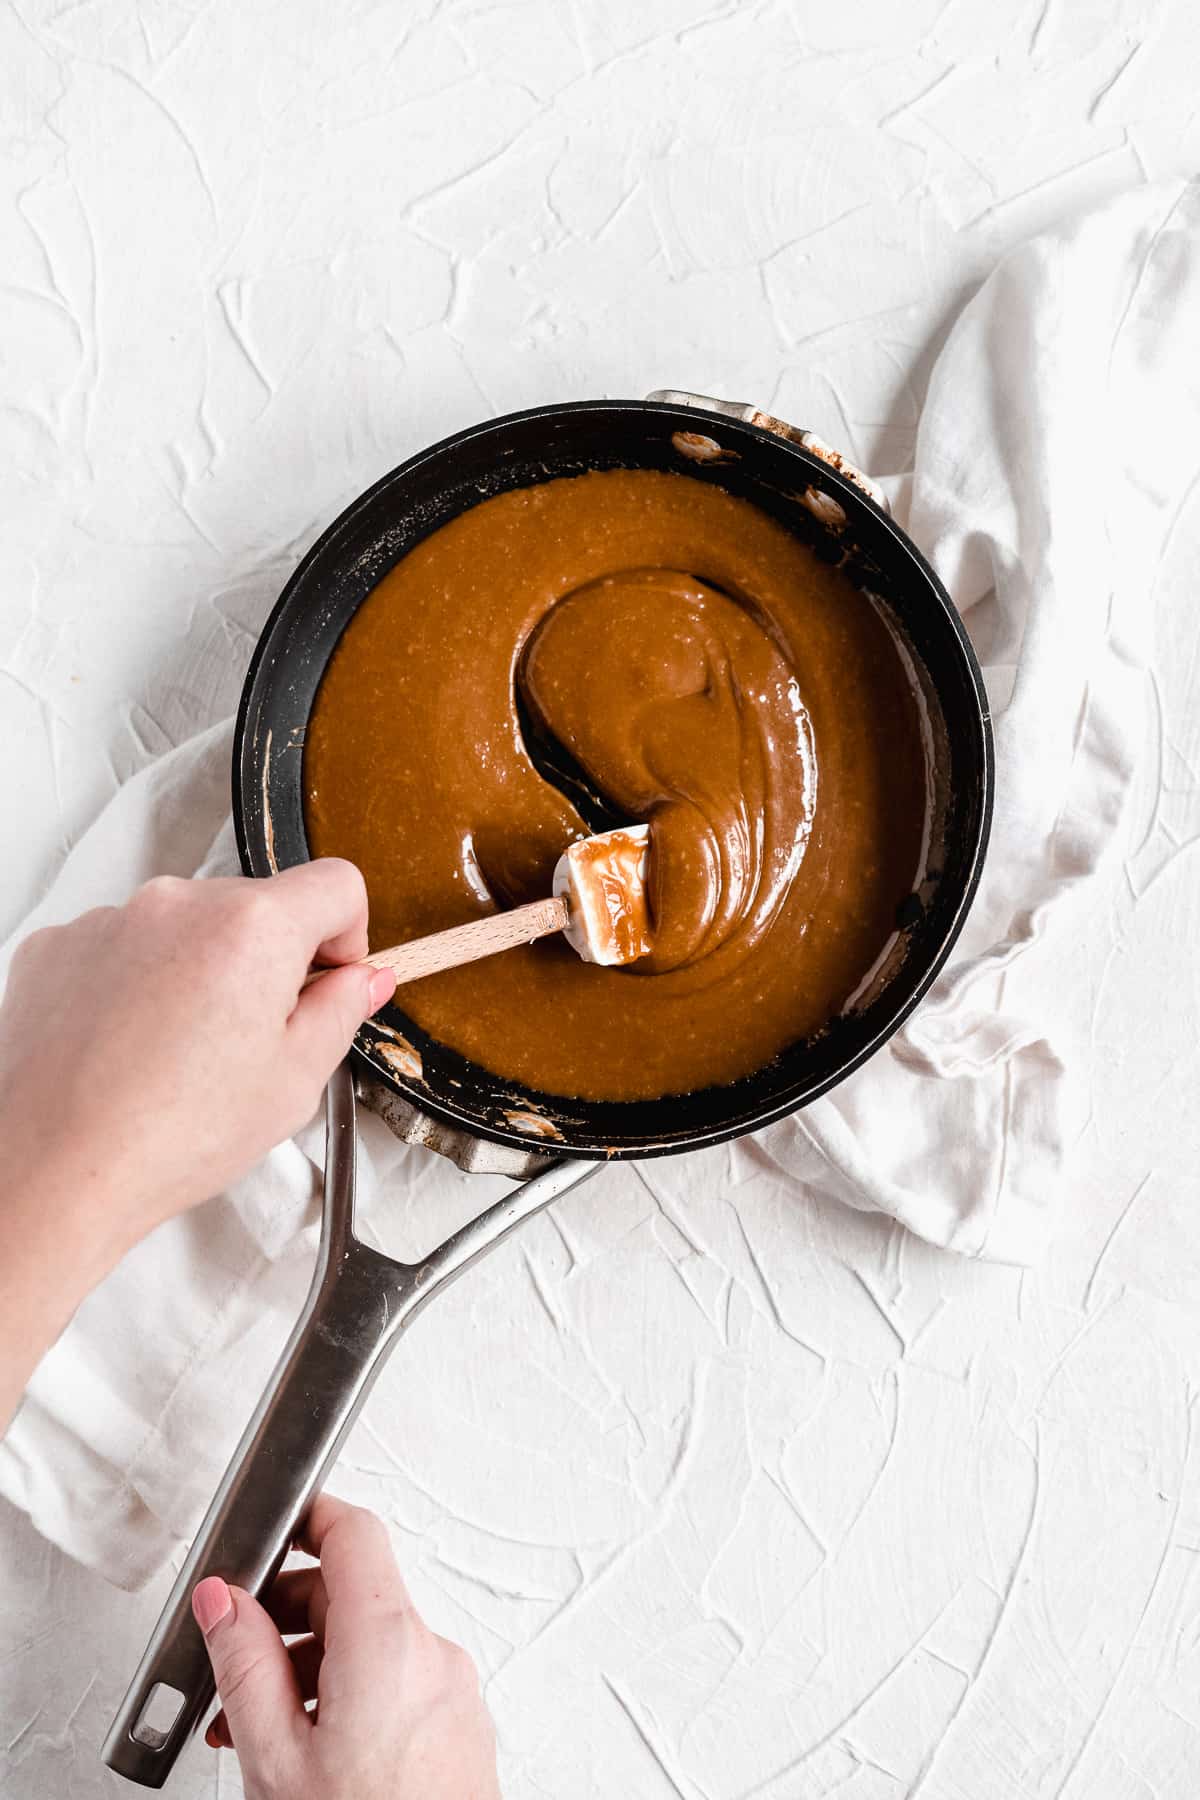 An overhead photo of the salted caramel mixture being made in a black saucepan.  A hand with a white spatula is stirring the mixture.  